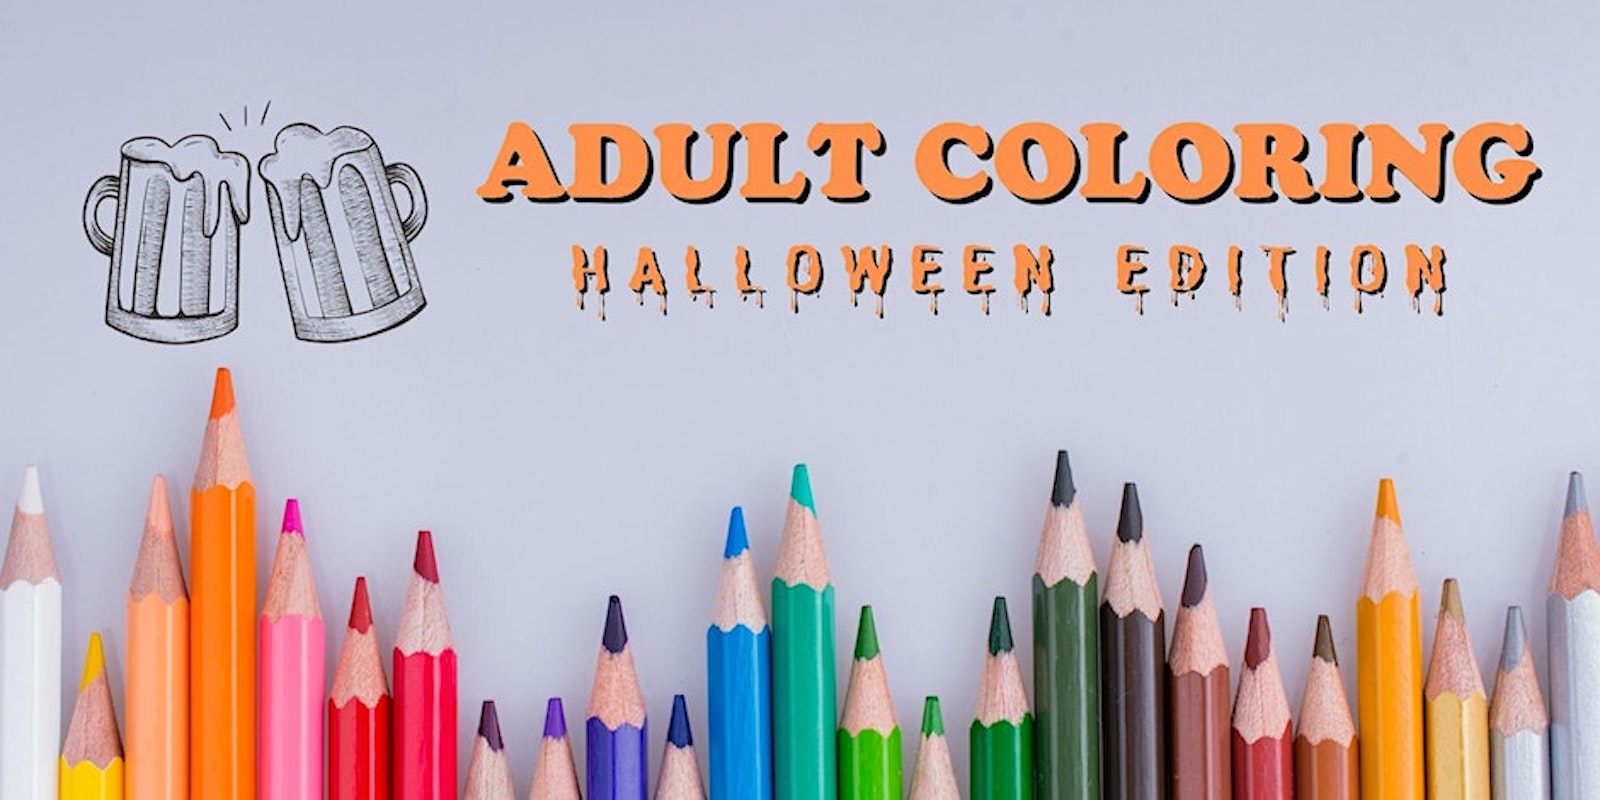 McGregor Square - Events - Adult Coloring